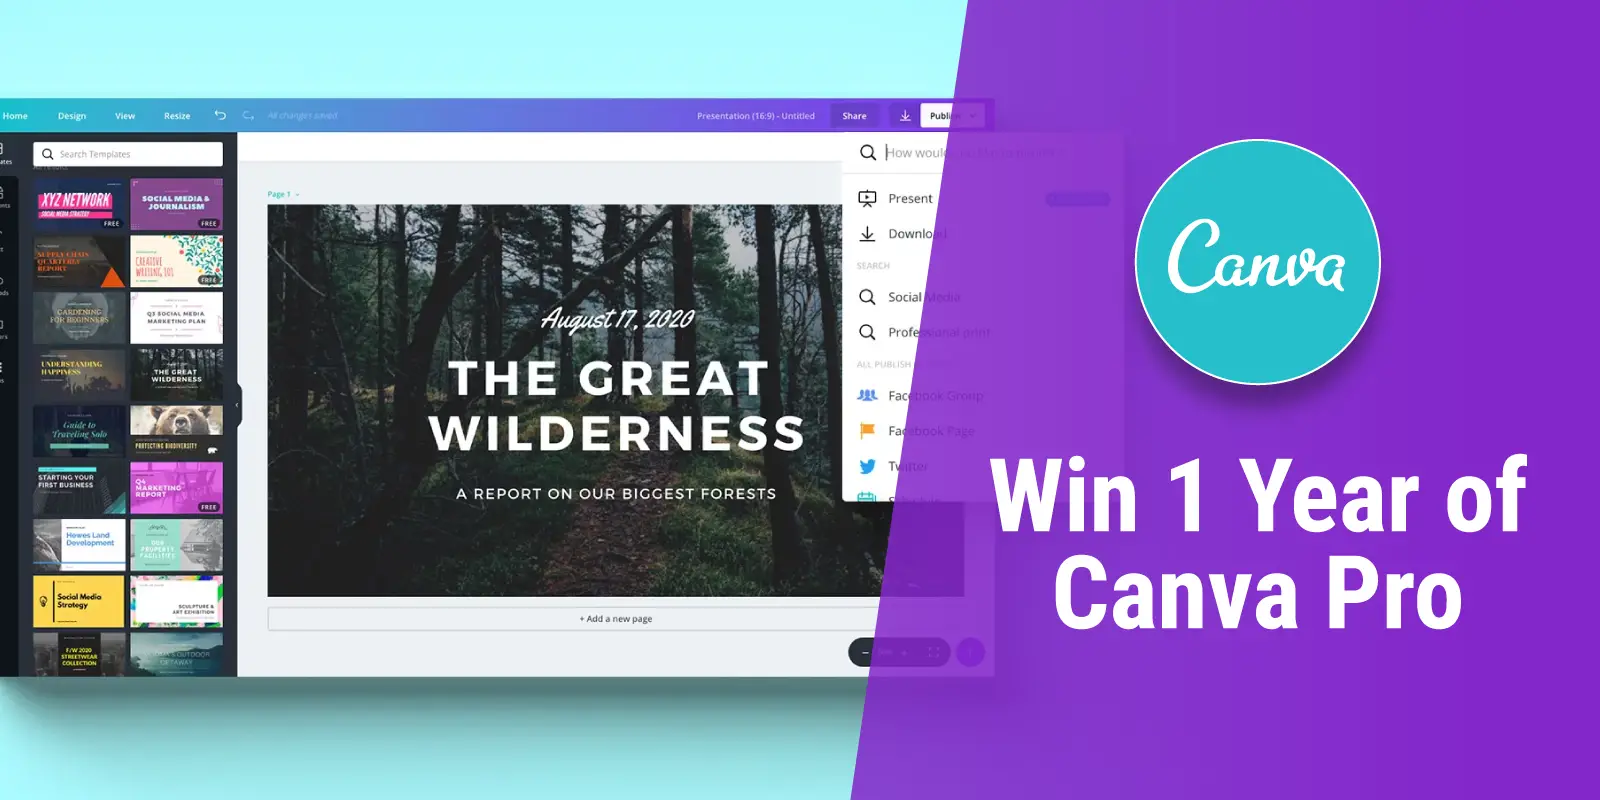 Enter for your chance to win a Free Year of Canva Pro! Unlock all the amazing extra features of Canva with this one year subscription to Canva Pro valued at $120. No matter what ‘work’ means to you, Canva Pro has all the tools you need to design graphics for projects big and small. No design skills necessary: simply drag and drop.